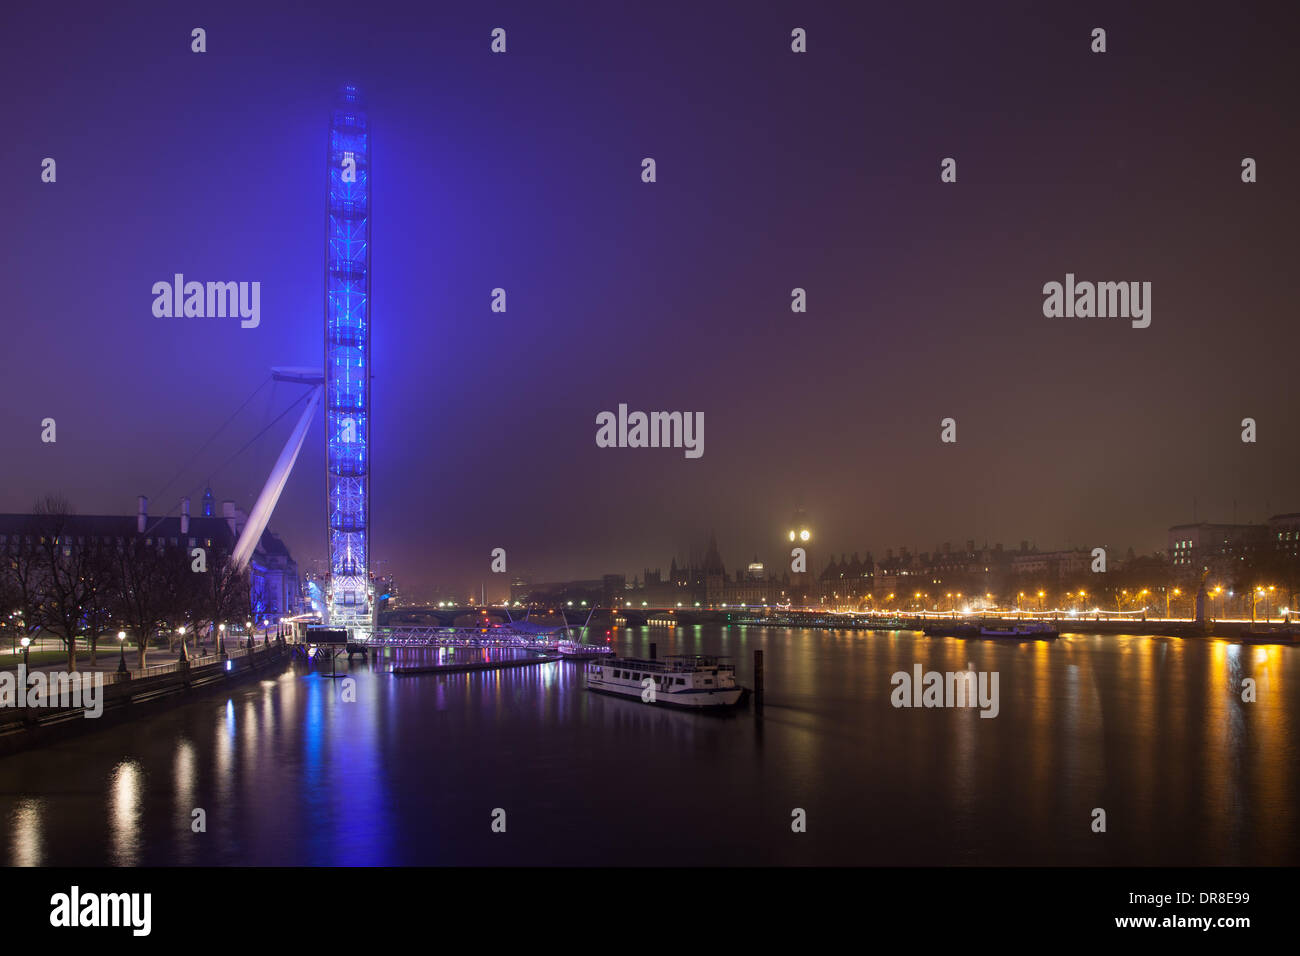 London UK, 21st Jan 2014. The blue lighting of the London Eye lights up the surrounding fog before dawn.  The London Eye is a giant Ferris wheel on the South Bank of the Thames. It was opened in 2000 and is 135m high. © Steve Bright/Alamy Live News Credit:  Steve Bright/Alamy Live News Stock Photo